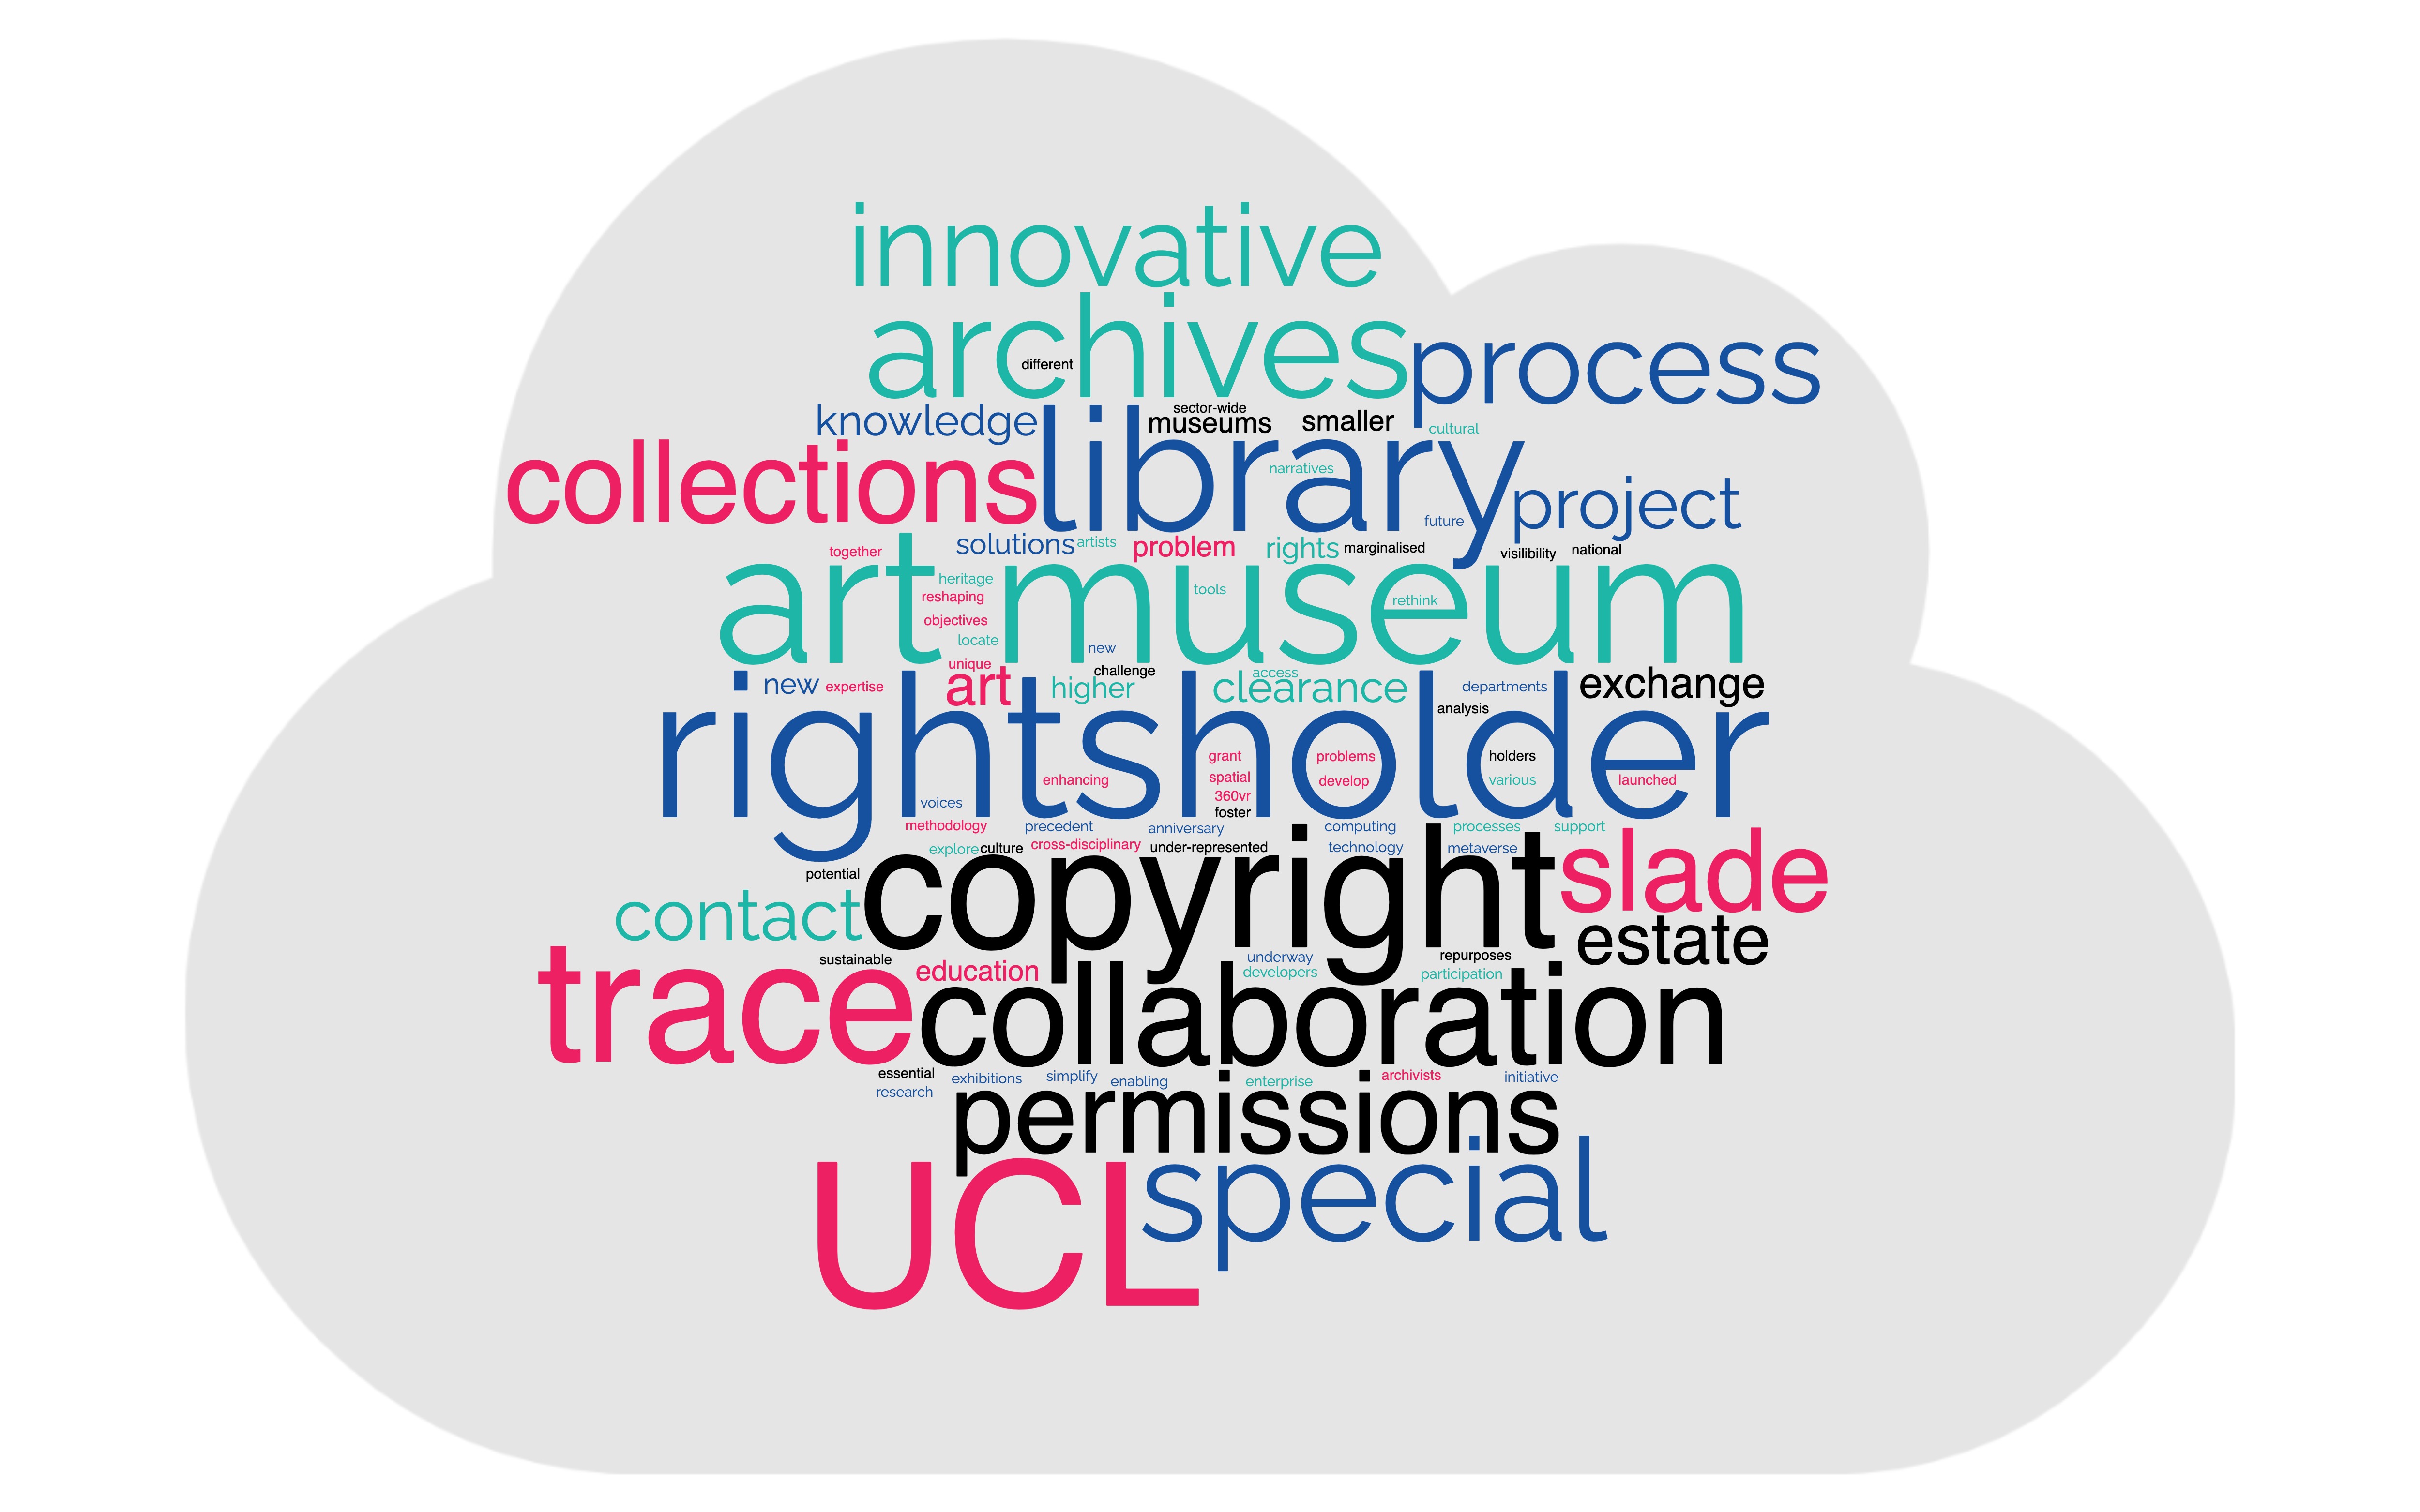 ucl_rightsholder_clearance_project_wordcloud_final